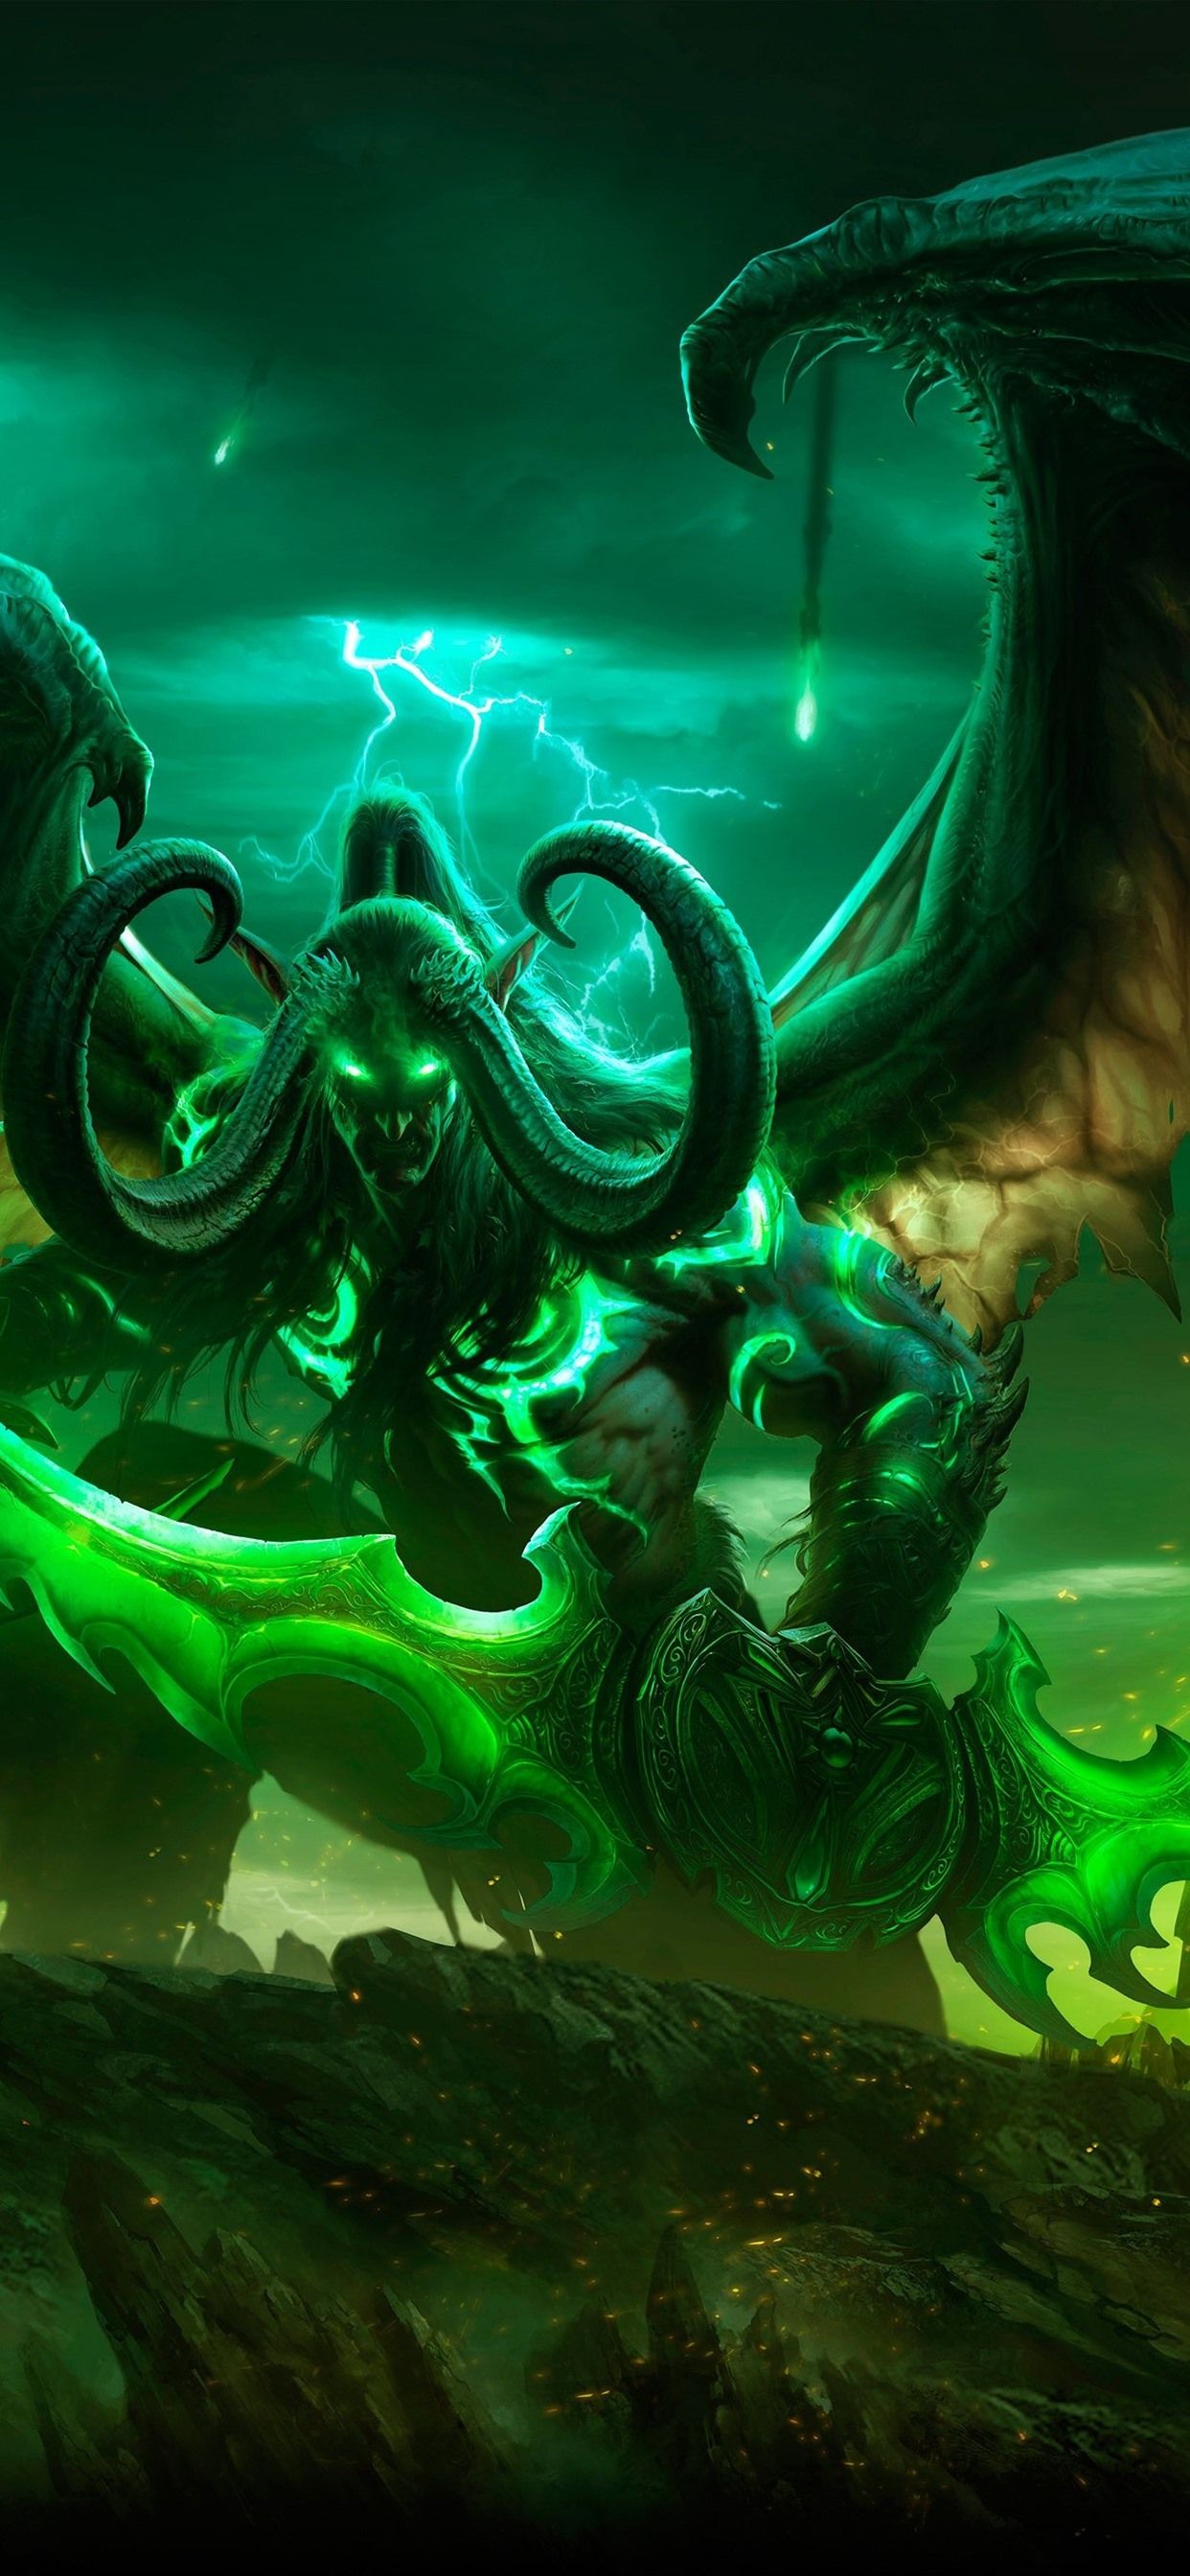 World Of Warcraft, Horns, Wings, Game Art Picture 1242x2688 IPhone 11 Pro XS Max Wallpaper, Background, Picture, Image